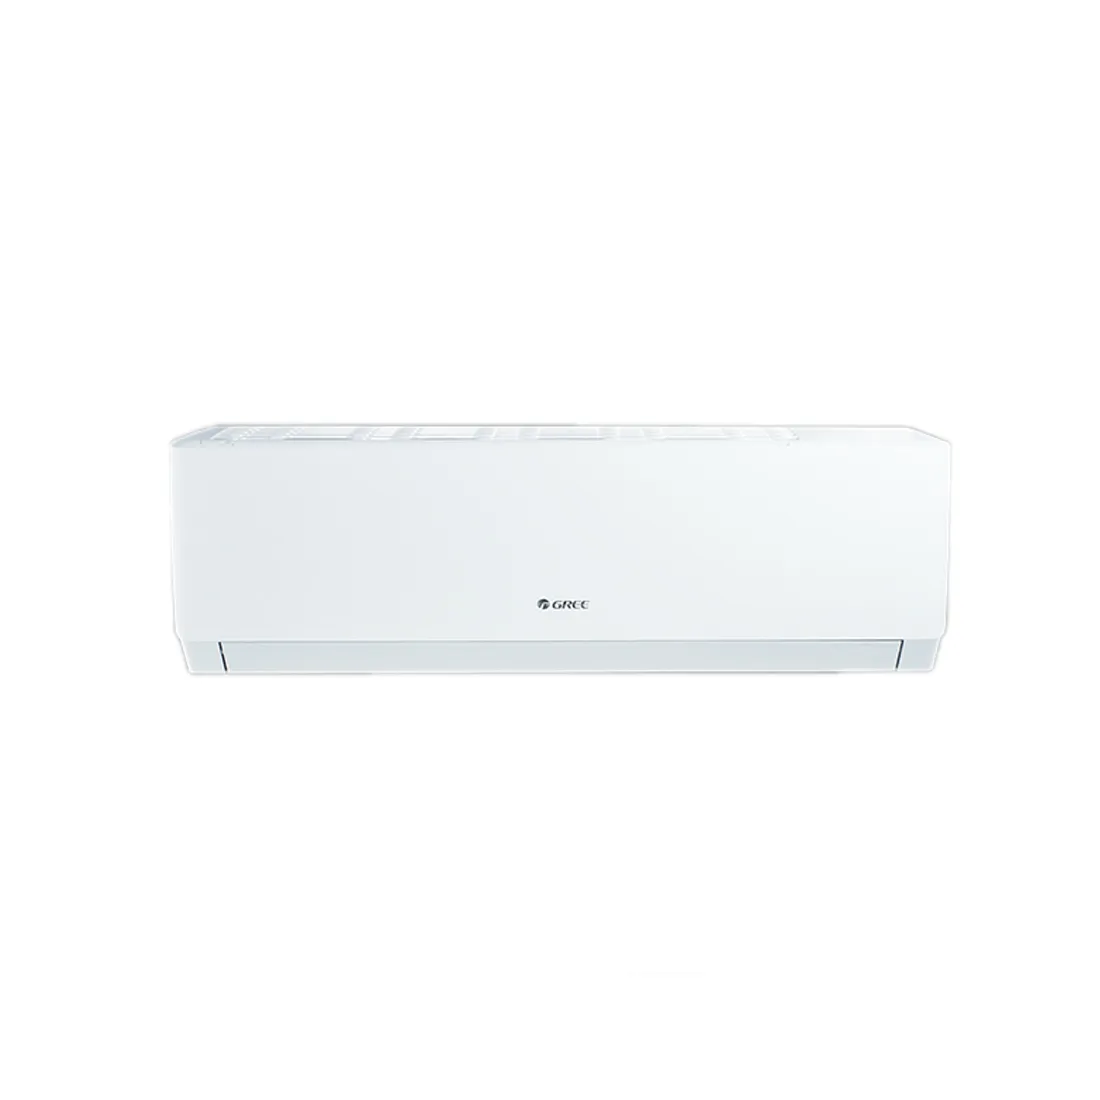 Gree GS 12LM Air Conditioner